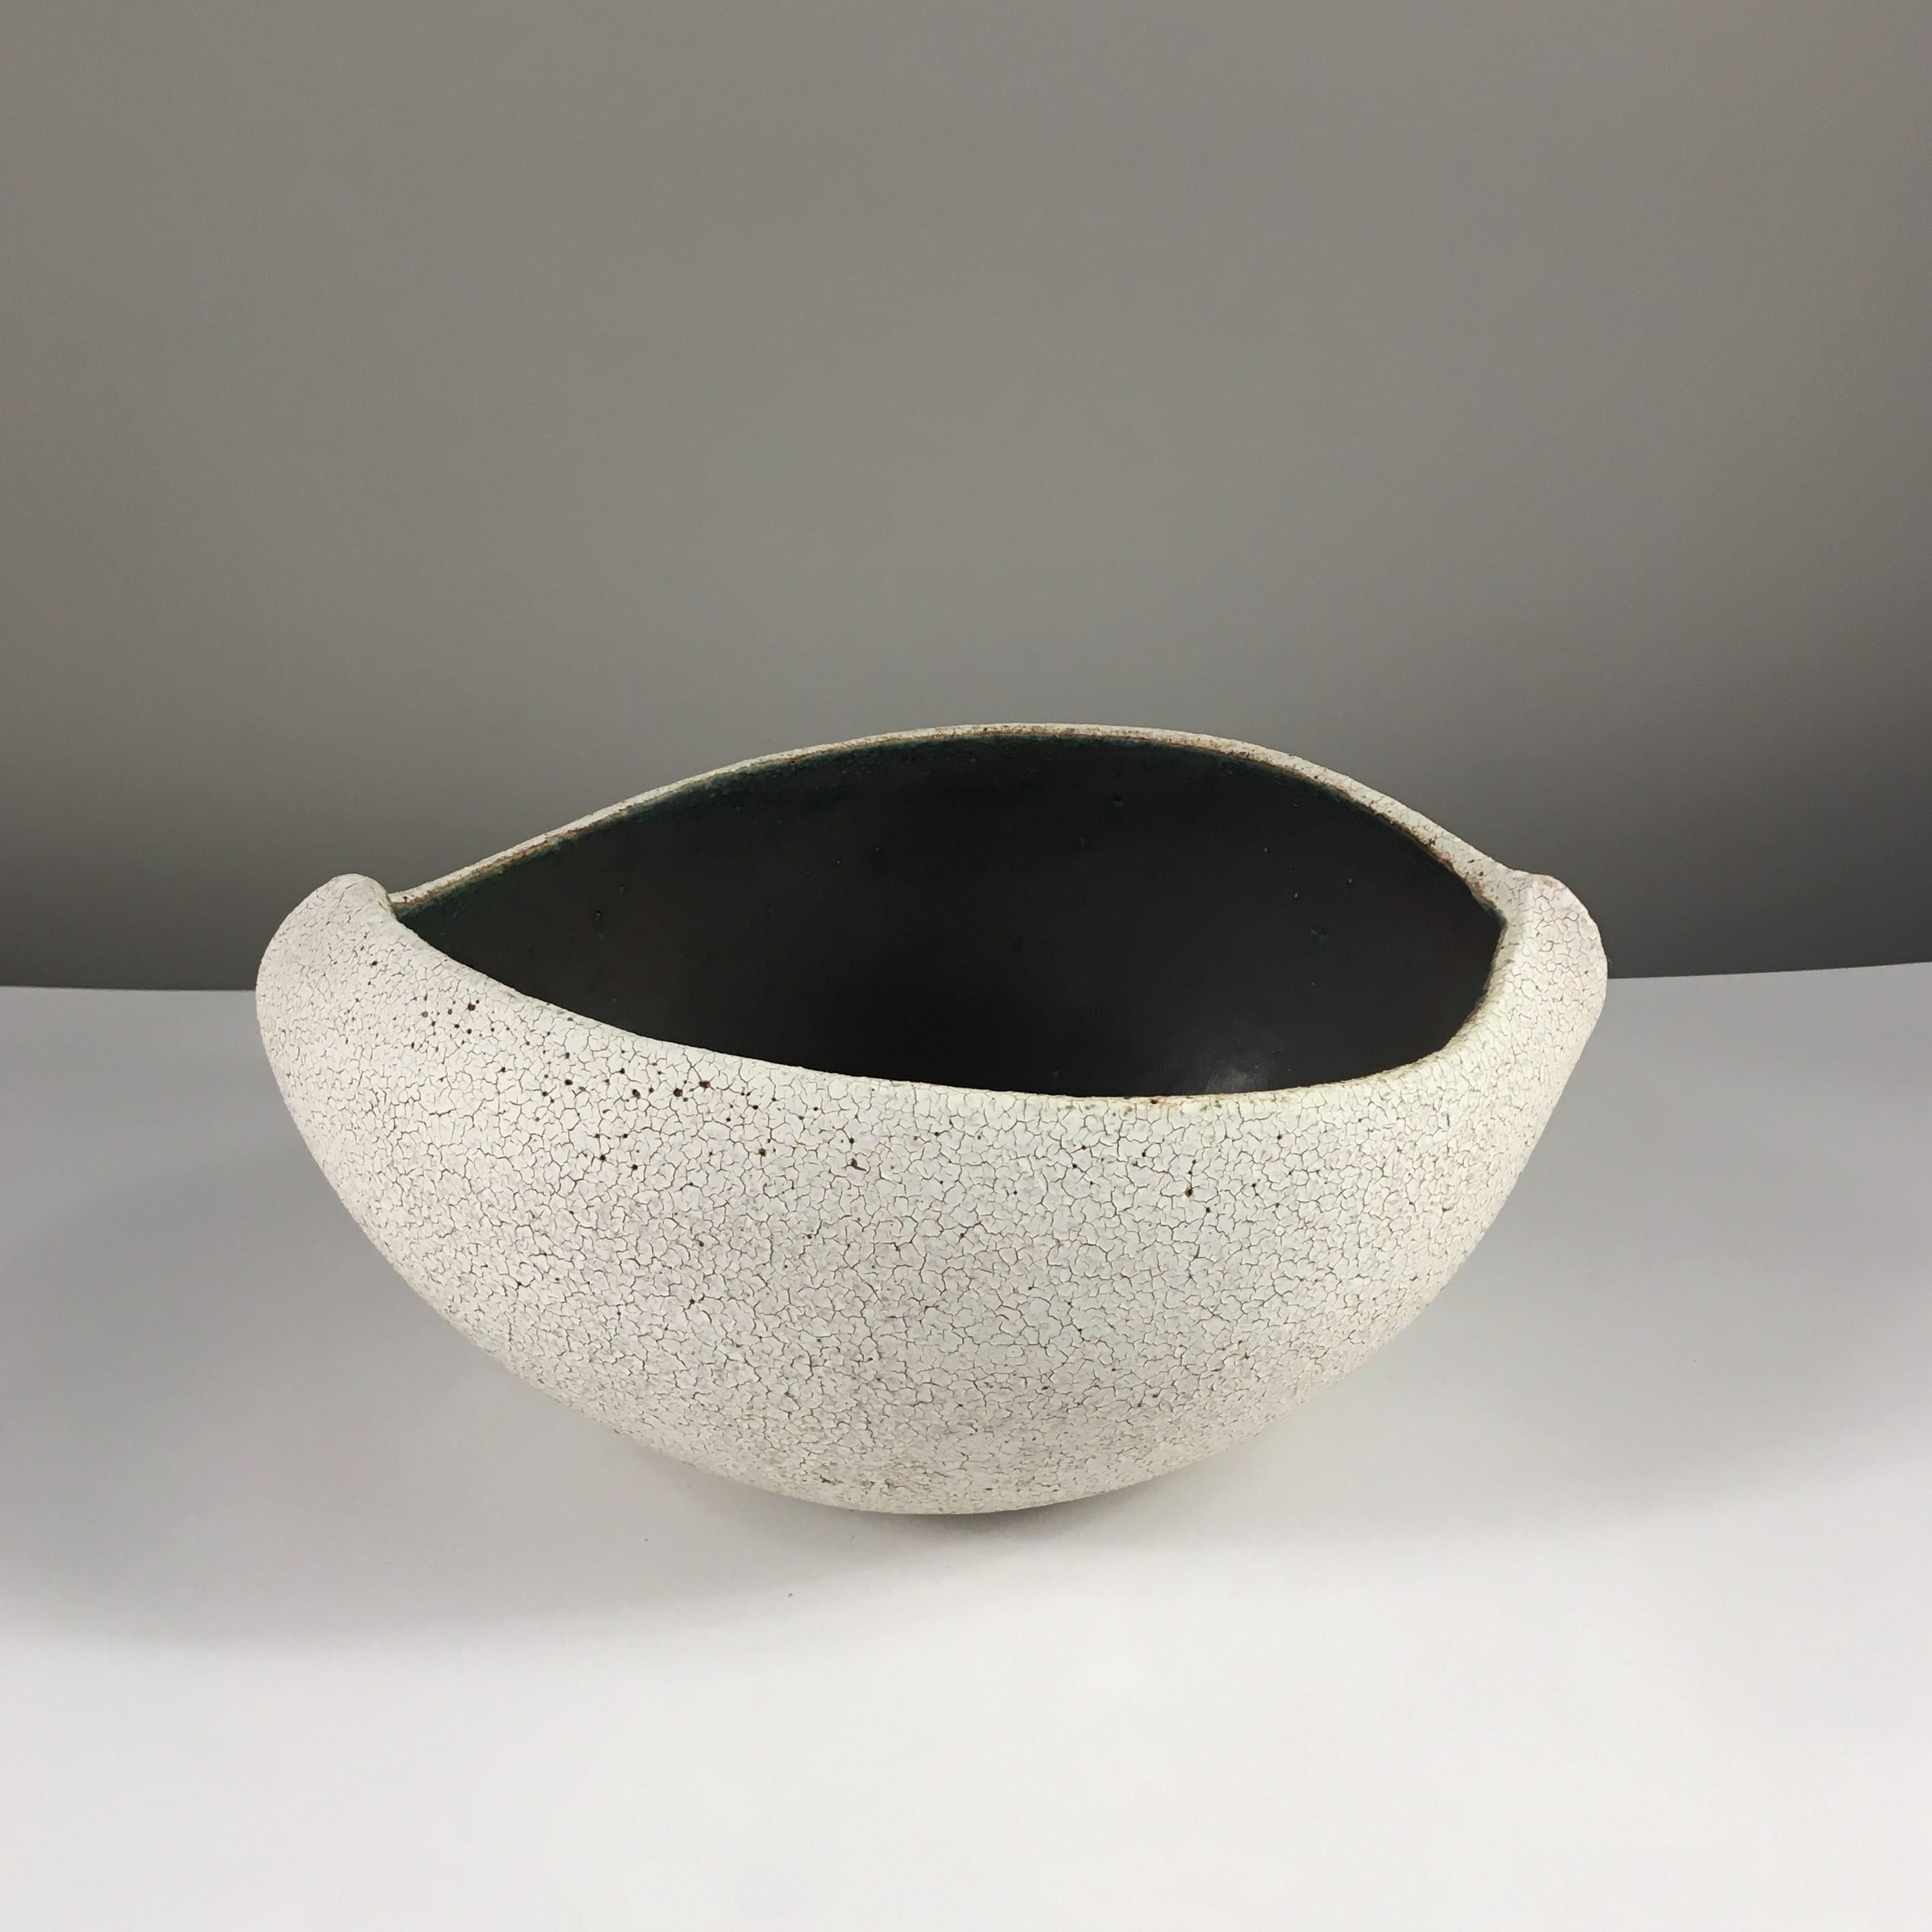 American Boat Shaped Bowl with Dark Inner Glaze by Yumiko Kuga For Sale